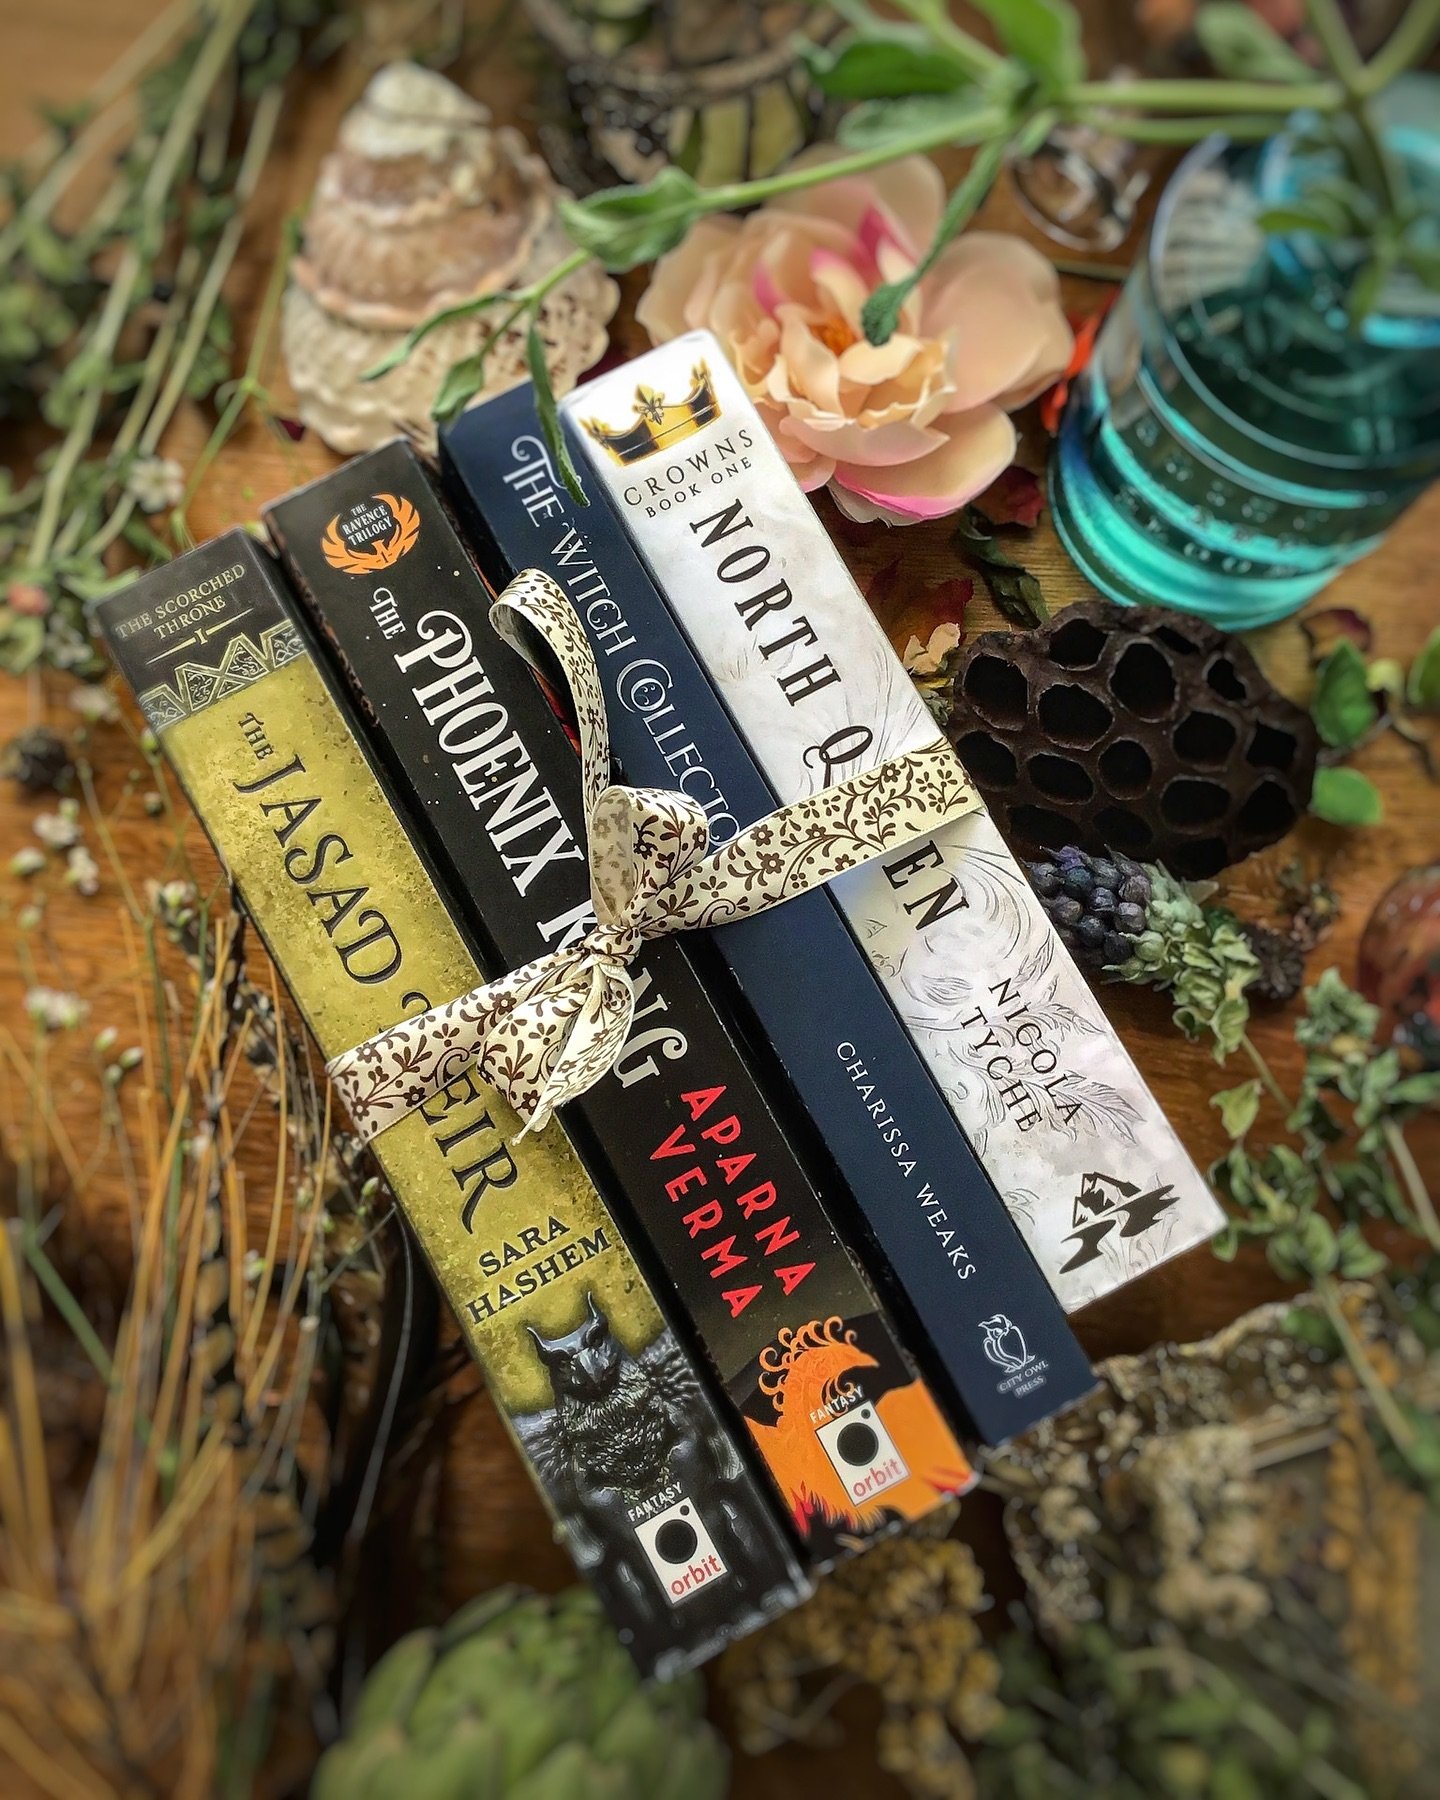 Happy Stack Saturday, friends. I hope everyone's weekend is off to a good start.

Here, I have a stack of books from my TBR shelf.  Each one is a starter to a series I want to read. They&rsquo;ve all been recommended to me, and I&rsquo;m excited to s